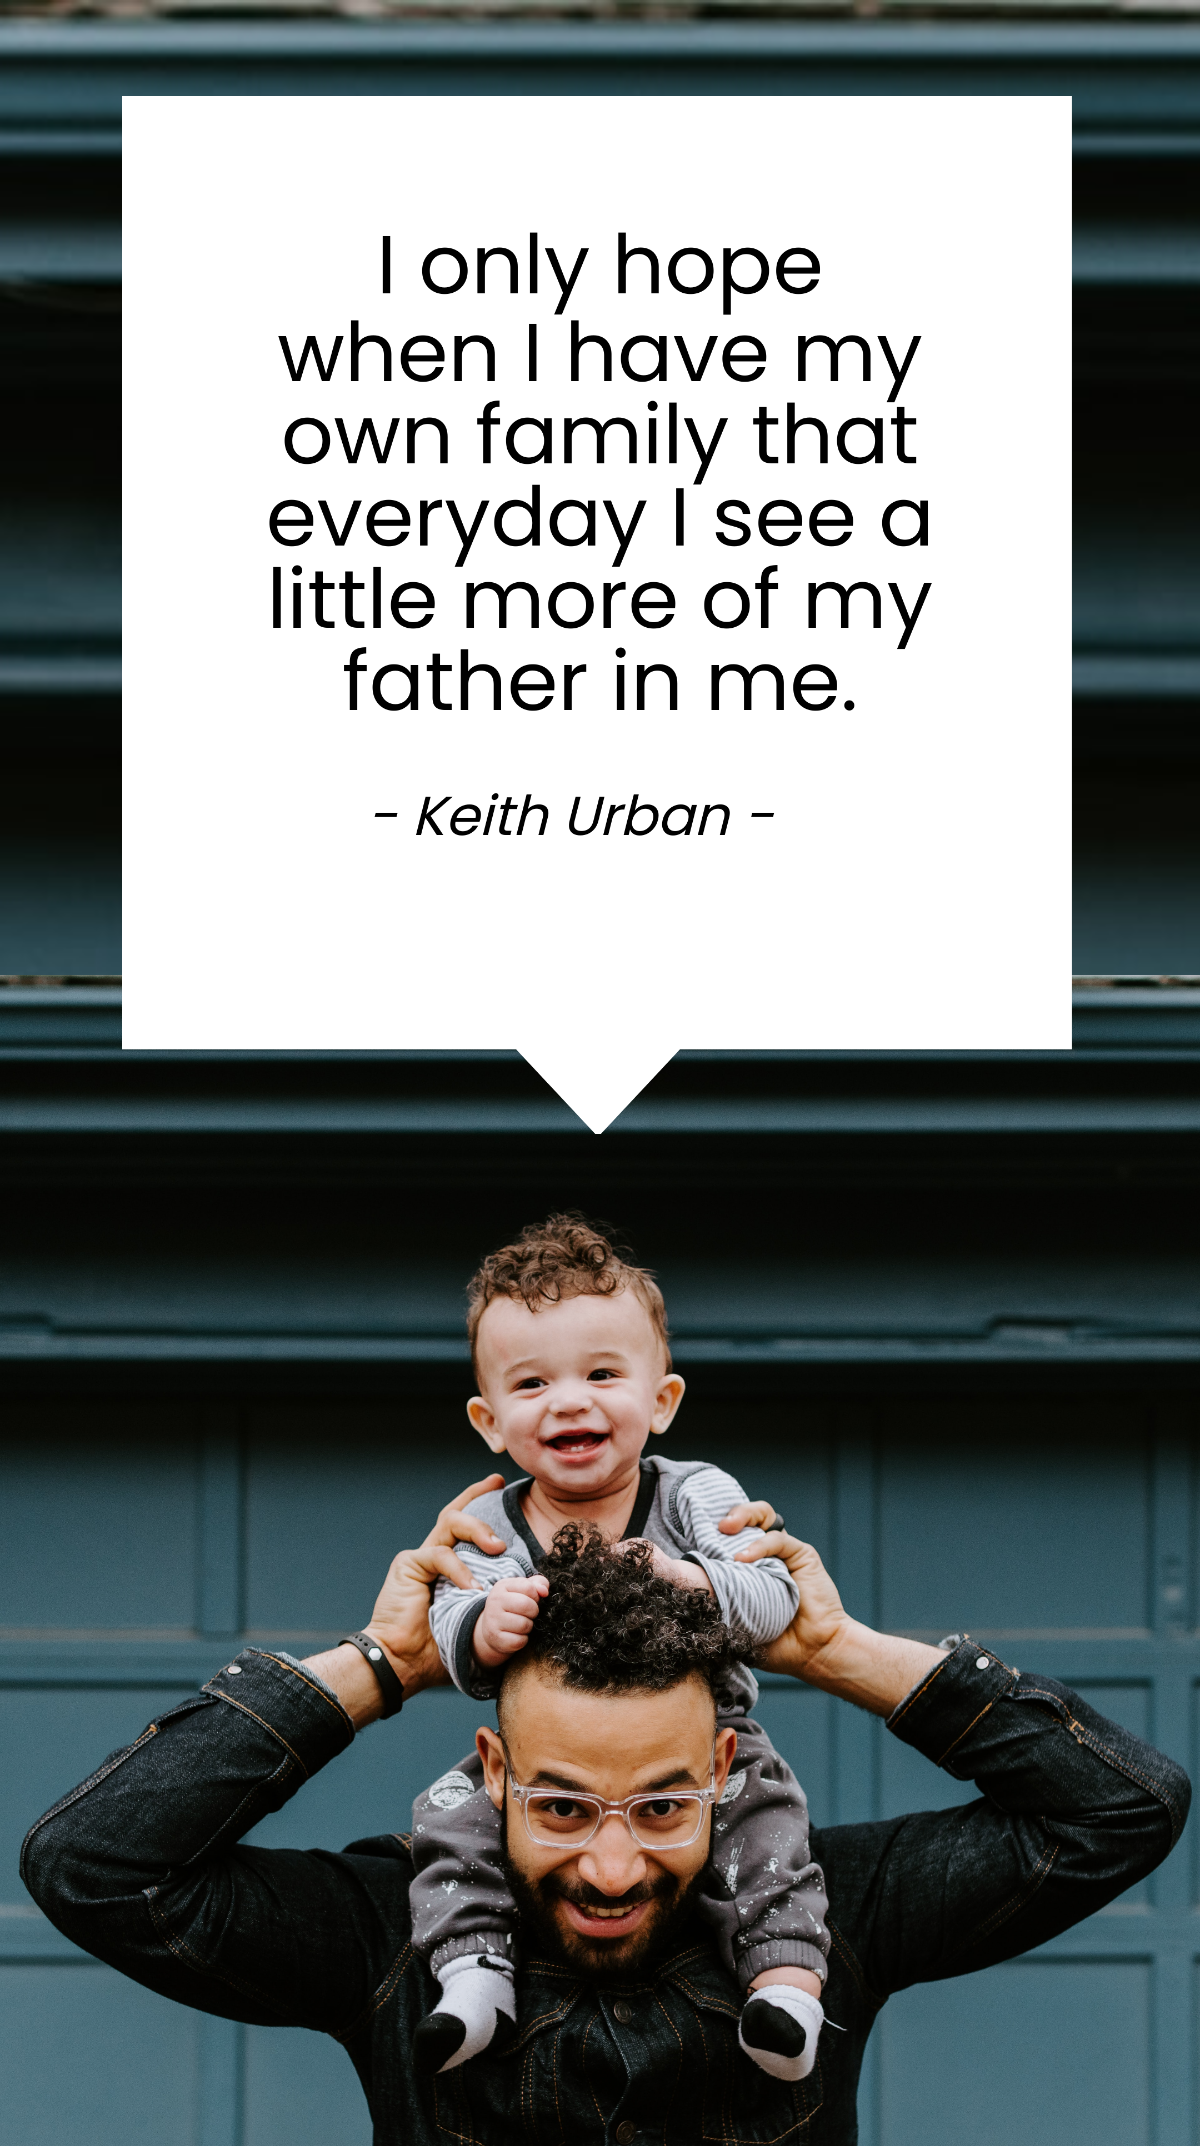 Keith Urban - I only hope when I have my own family that everyday I see a little more of my father in me. Template